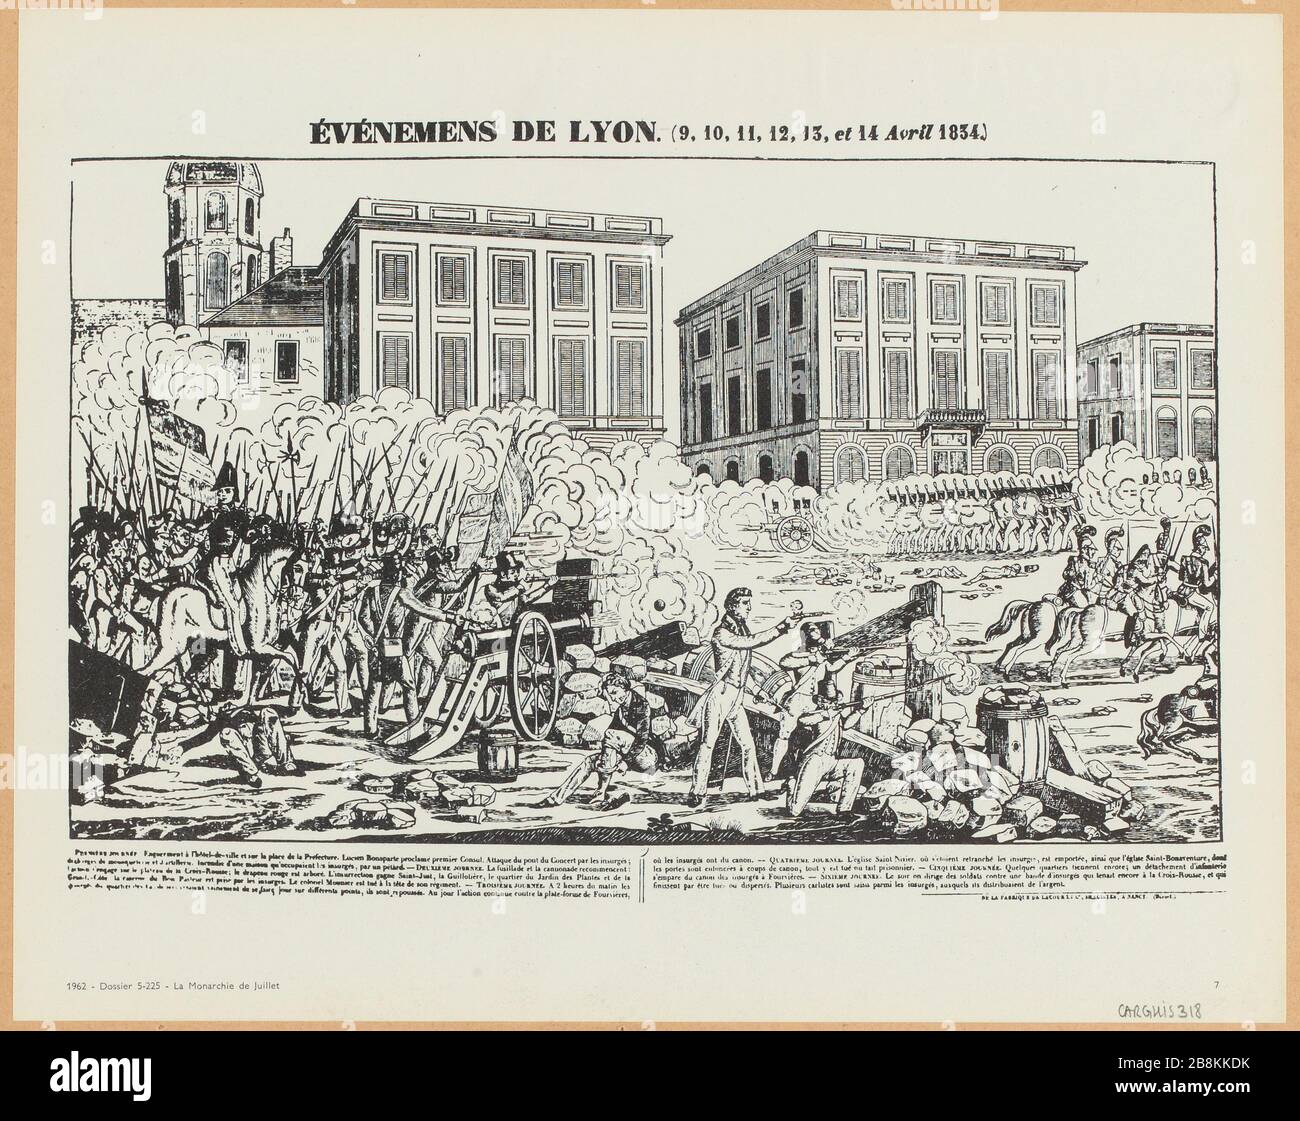 Events in Lyon (9, 10, 11, 12, 13 and April 14, 1834), limited print. (TF  Stock Photo - Alamy